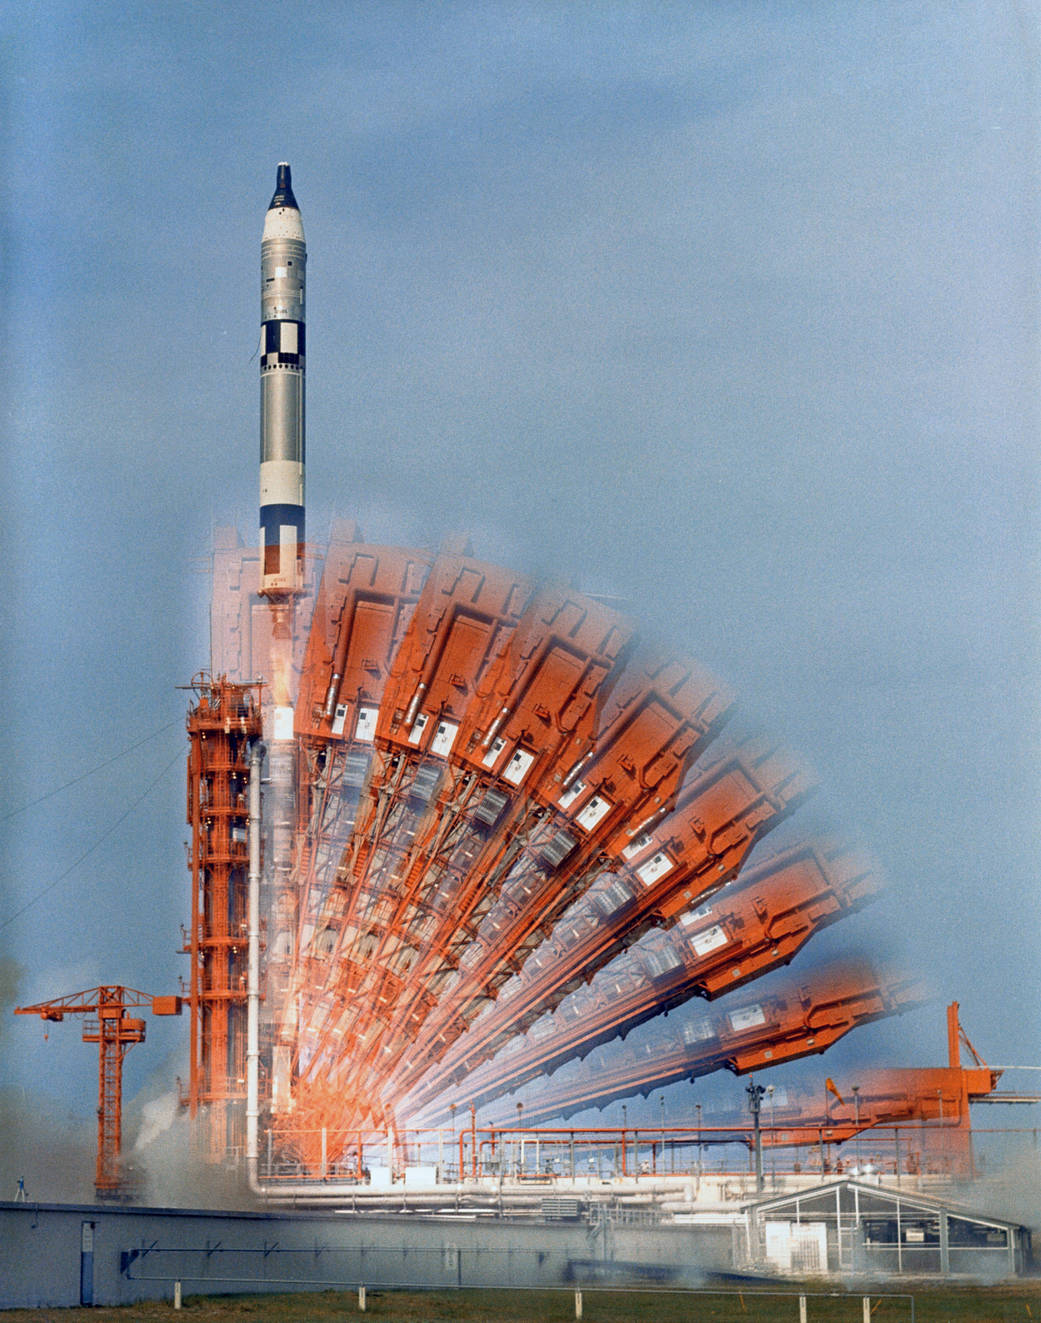 Multiple exposure showing the Gemini 10 spacecraft lifting off.